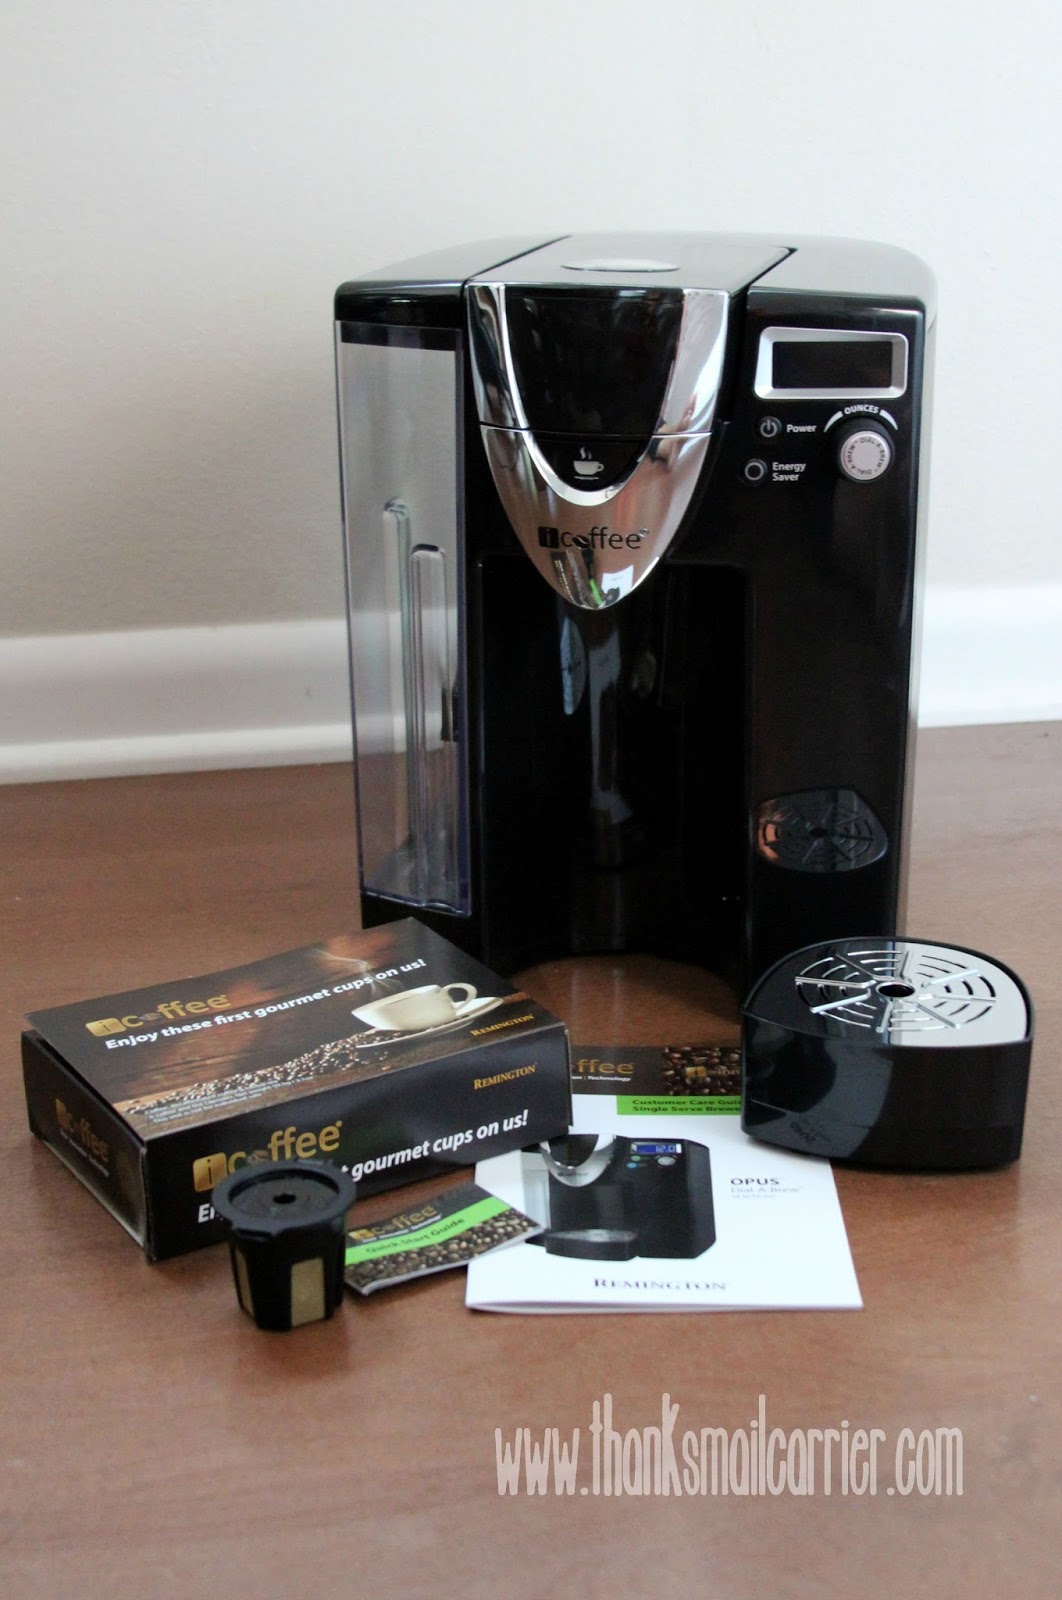 iCoffee: First ever steam brewed coffee maker